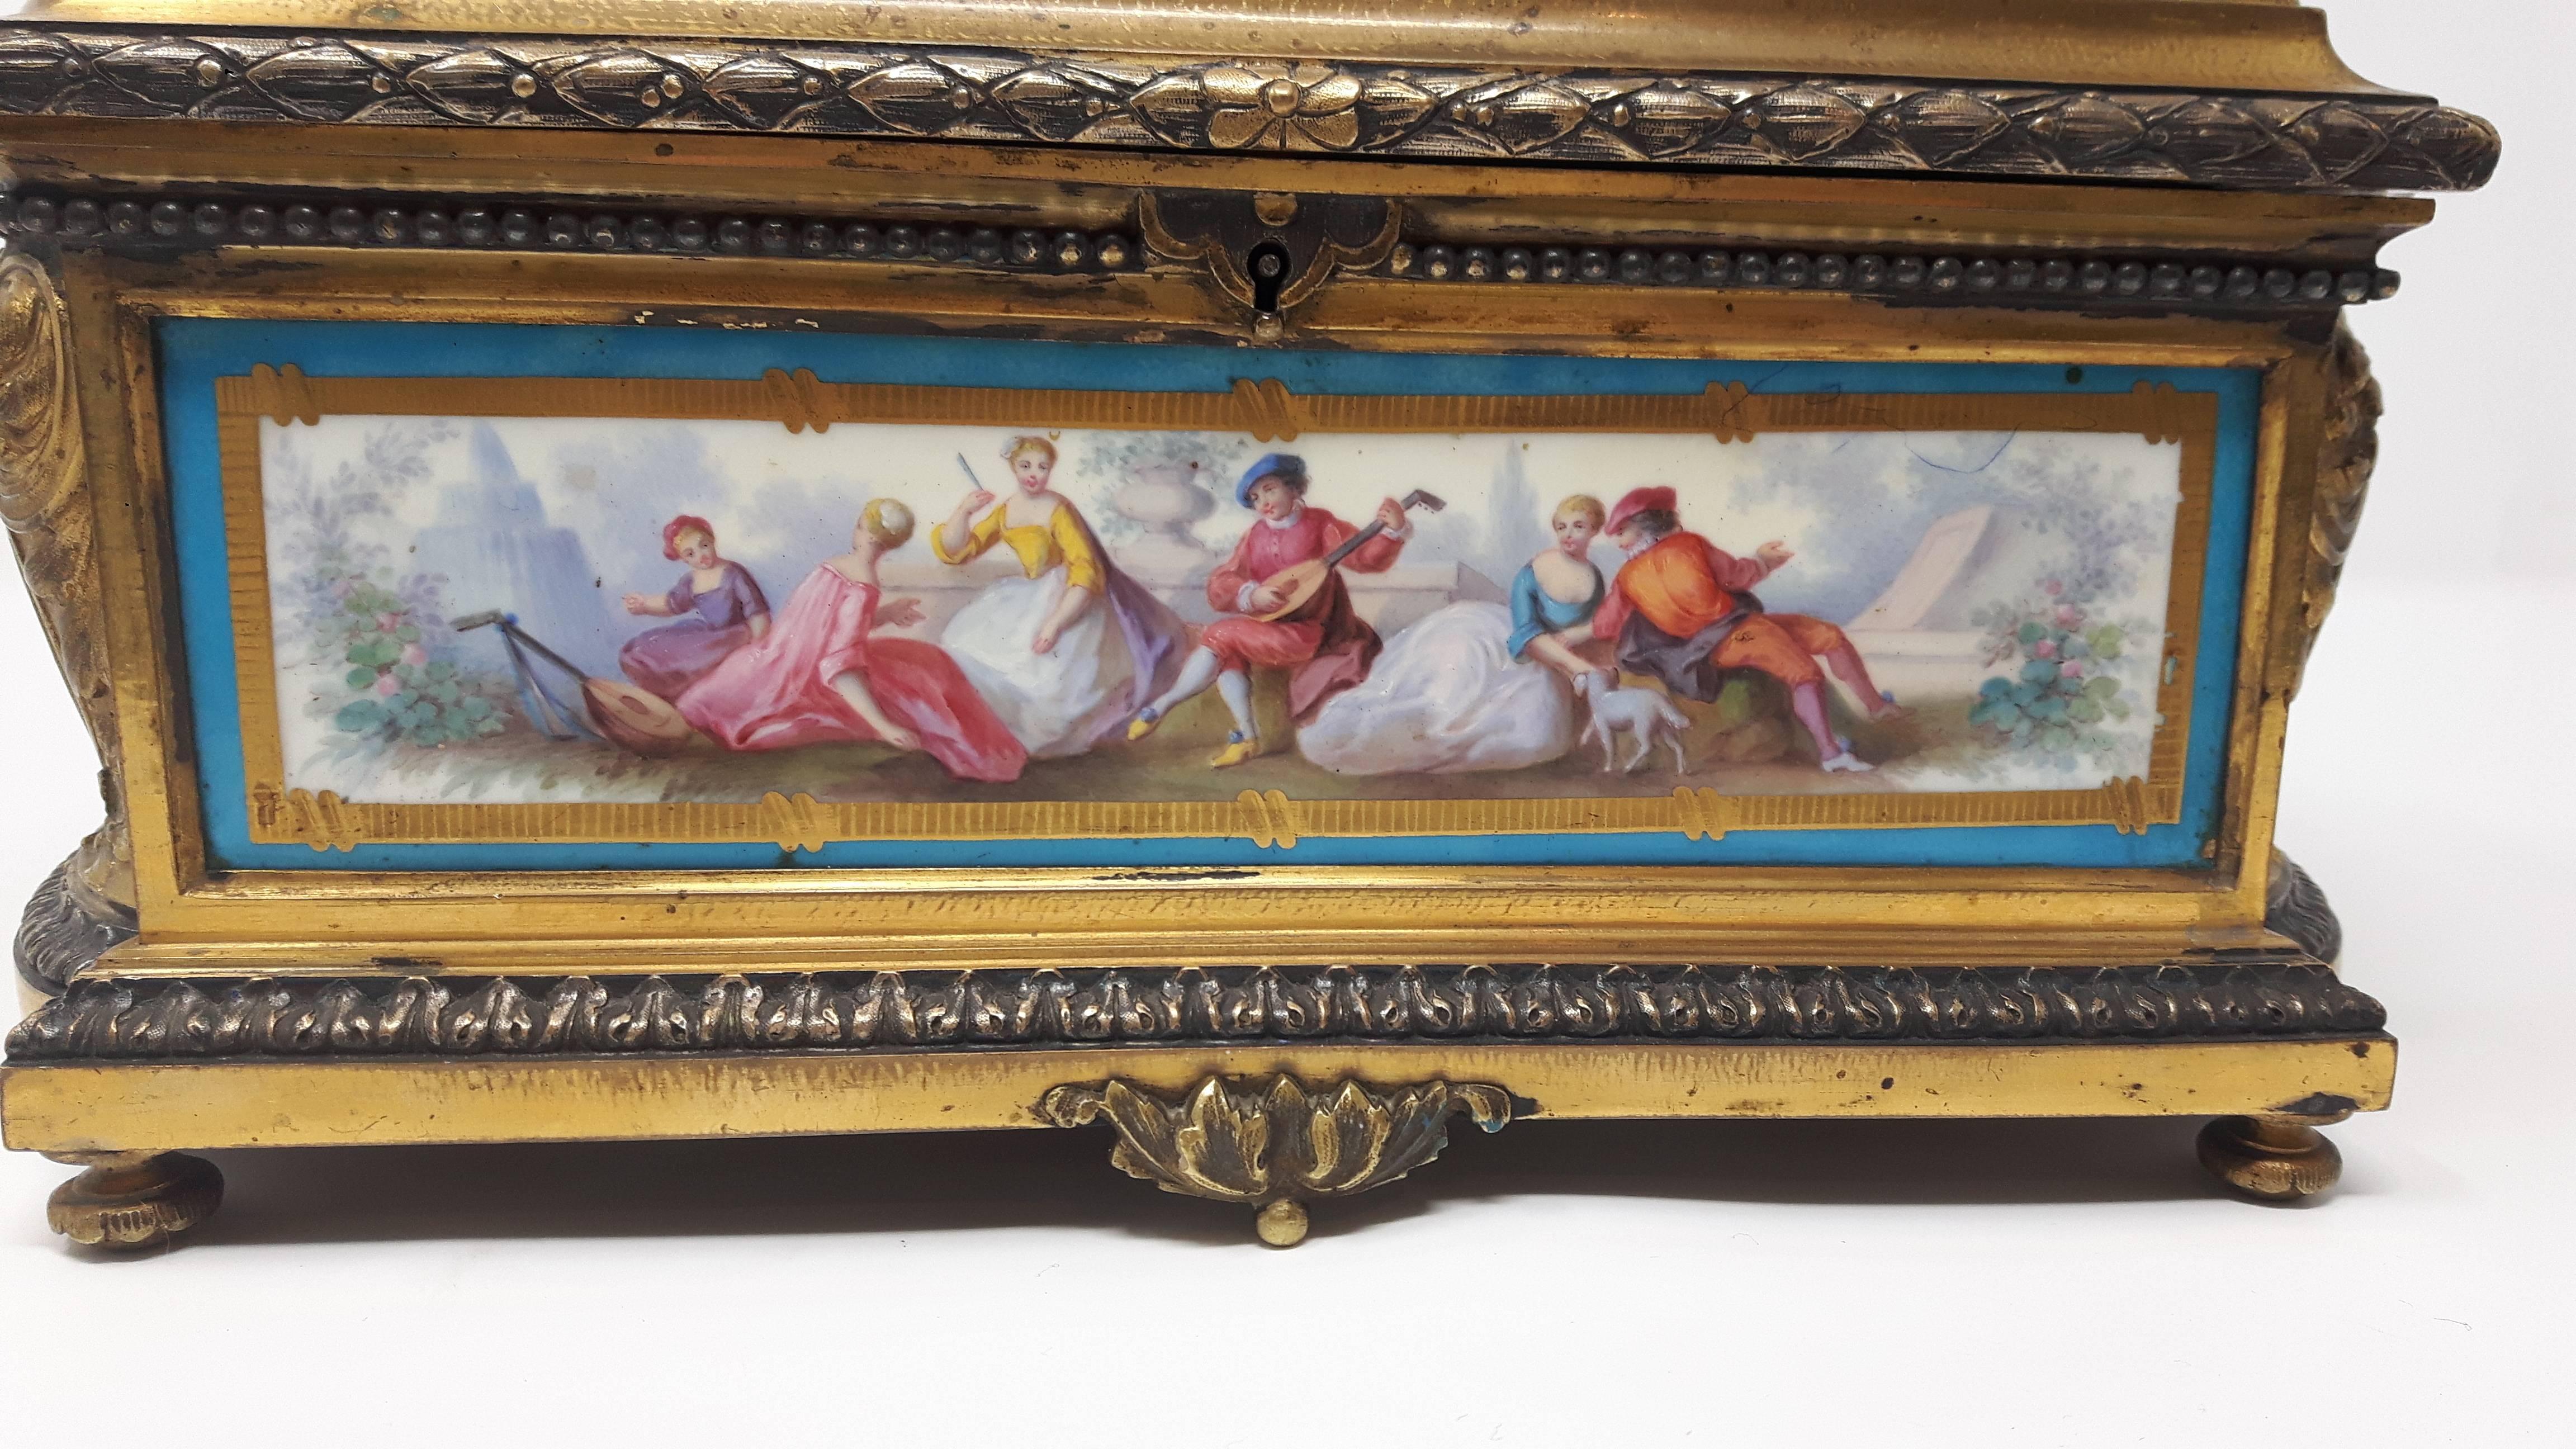 A rare antique French gilt bronze and silver Sevres porcelain casket finely painted with neoclassical figures on two round and two rectangular plaques.